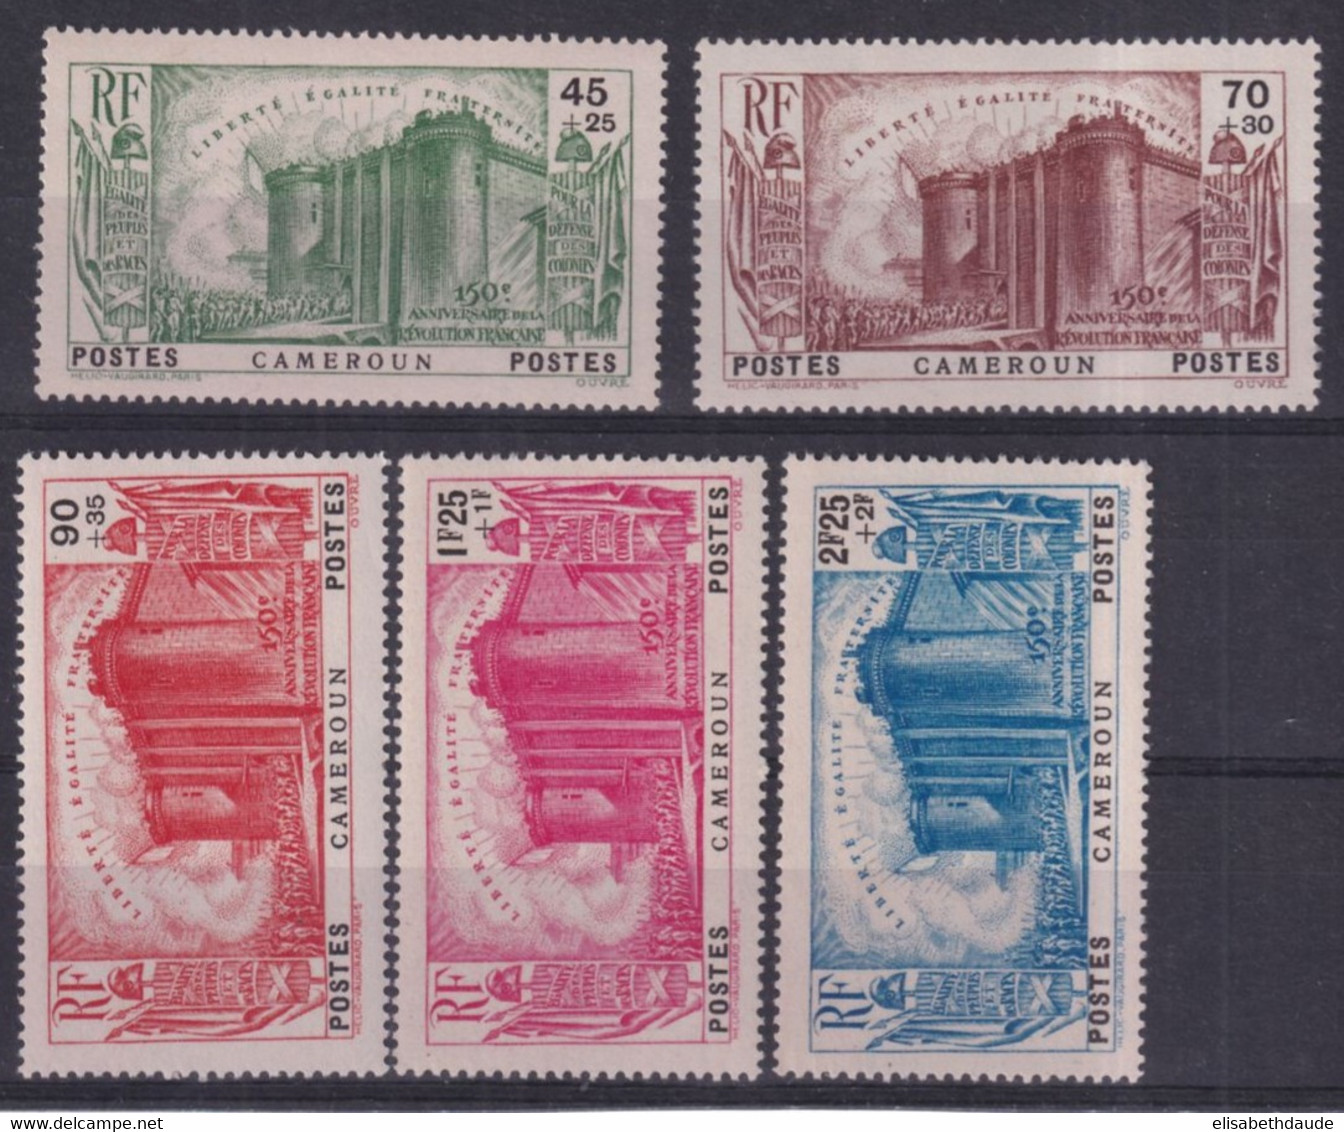 CAMEROUN - 1939 - SERIE COMPLETE "REVOLUTION" YVERT N°192/196 ** MNH ! - COTE = 150 EUR. - Unused Stamps